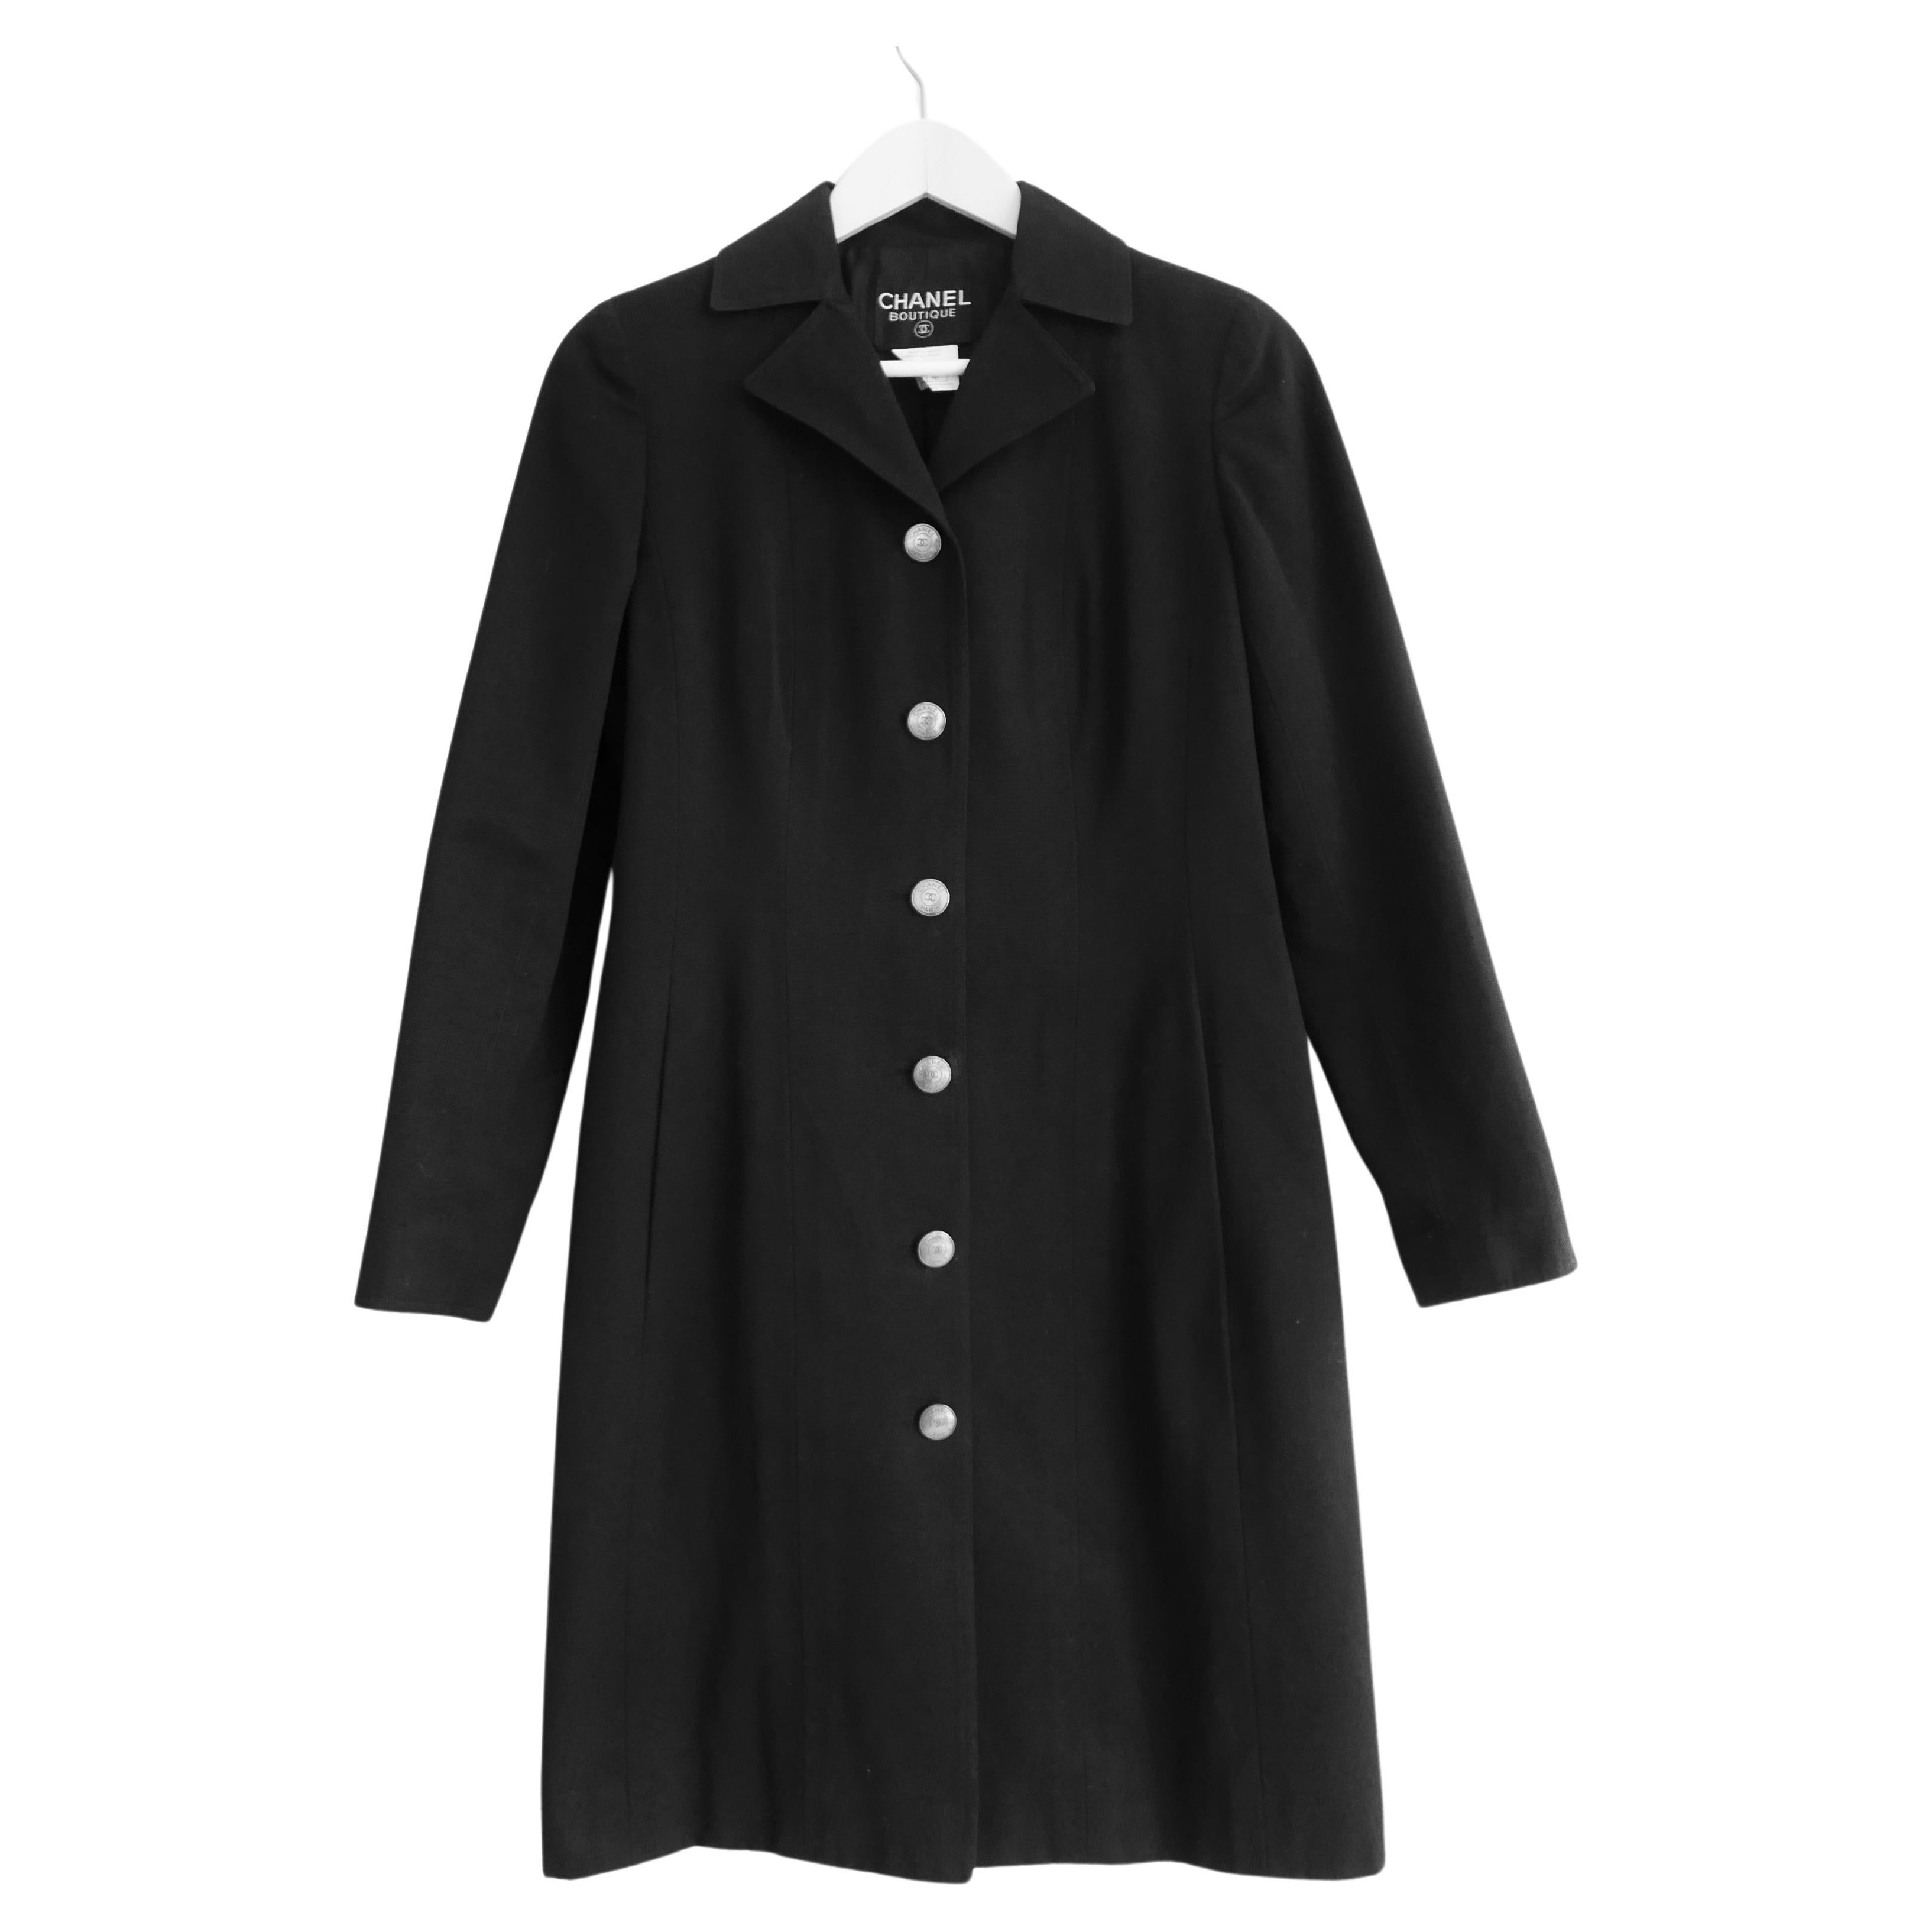 Chanel Cruise 1997 Long Black Coat w/Metal Buttons For Sale